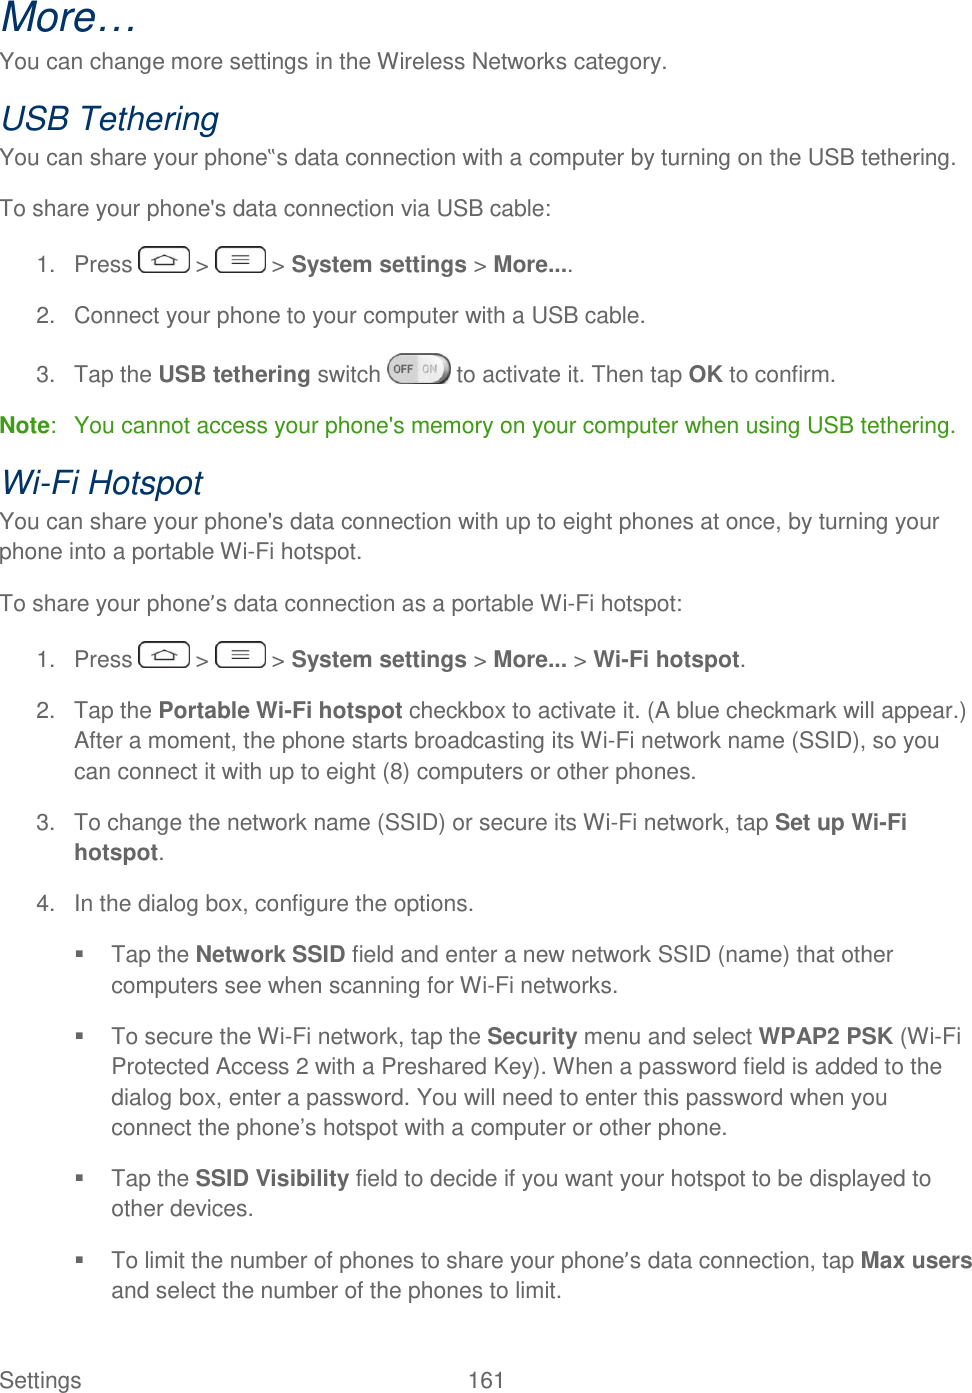  Settings  161   More… You can change more settings in the Wireless Networks category. USB Tethering You can share your phone‟s data connection with a computer by turning on the USB tethering. To share your phone&apos;s data connection via USB cable: 1.  Press   &gt;   &gt; System settings &gt; More.... 2.  Connect your phone to your computer with a USB cable. 3.  Tap the USB tethering switch   to activate it. Then tap OK to confirm. Note:  You cannot access your phone&apos;s memory on your computer when using USB tethering. Wi-Fi Hotspot You can share your phone&apos;s data connection with up to eight phones at once, by turning your phone into a portable Wi-Fi hotspot. To share your phone’s data connection as a portable Wi-Fi hotspot: 1.  Press   &gt;   &gt; System settings &gt; More... &gt; Wi-Fi hotspot. 2.  Tap the Portable Wi-Fi hotspot checkbox to activate it. (A blue checkmark will appear.) After a moment, the phone starts broadcasting its Wi-Fi network name (SSID), so you can connect it with up to eight (8) computers or other phones. 3.  To change the network name (SSID) or secure its Wi-Fi network, tap Set up Wi-Fi hotspot. 4.  In the dialog box, configure the options.   Tap the Network SSID field and enter a new network SSID (name) that other computers see when scanning for Wi-Fi networks.   To secure the Wi-Fi network, tap the Security menu and select WPAP2 PSK (Wi-Fi Protected Access 2 with a Preshared Key). When a password field is added to the dialog box, enter a password. You will need to enter this password when you connect the phone‘s hotspot with a computer or other phone.   Tap the SSID Visibility field to decide if you want your hotspot to be displayed to other devices.   To limit the number of phones to share your phone’s data connection, tap Max users and select the number of the phones to limit. 